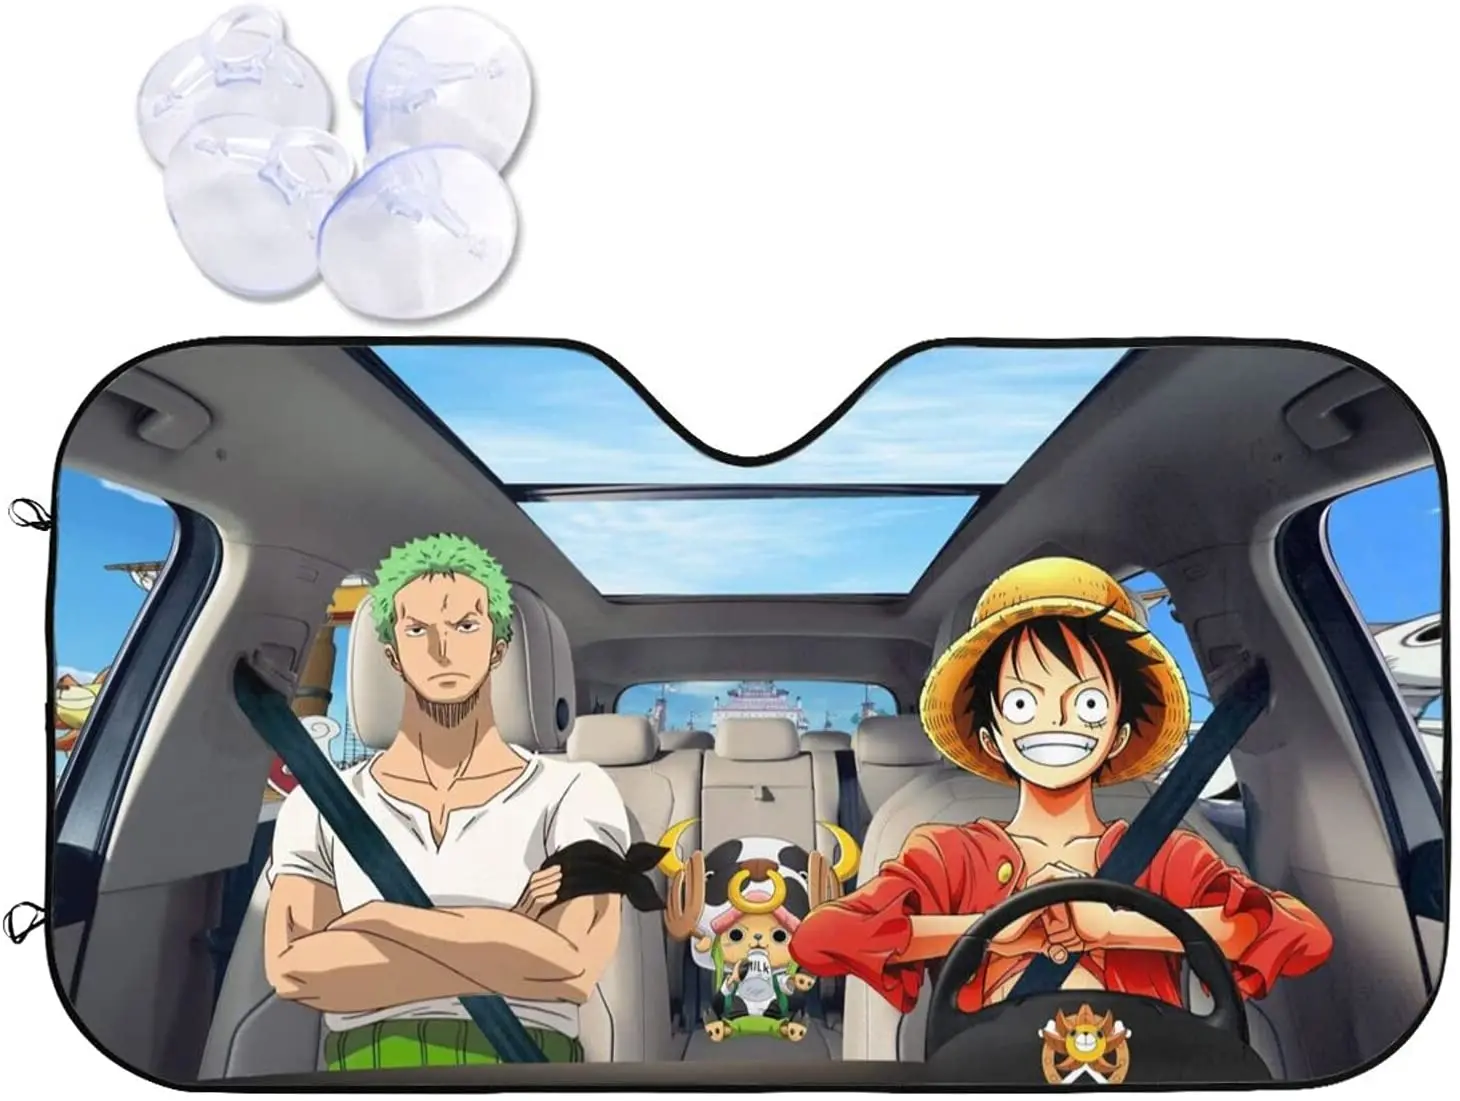 

Car Windshield Sun Shade,One Piece Anime Foldable Car Sun Visor Windshield Sunshade for Car Accessories, Fits Most Car Front Win